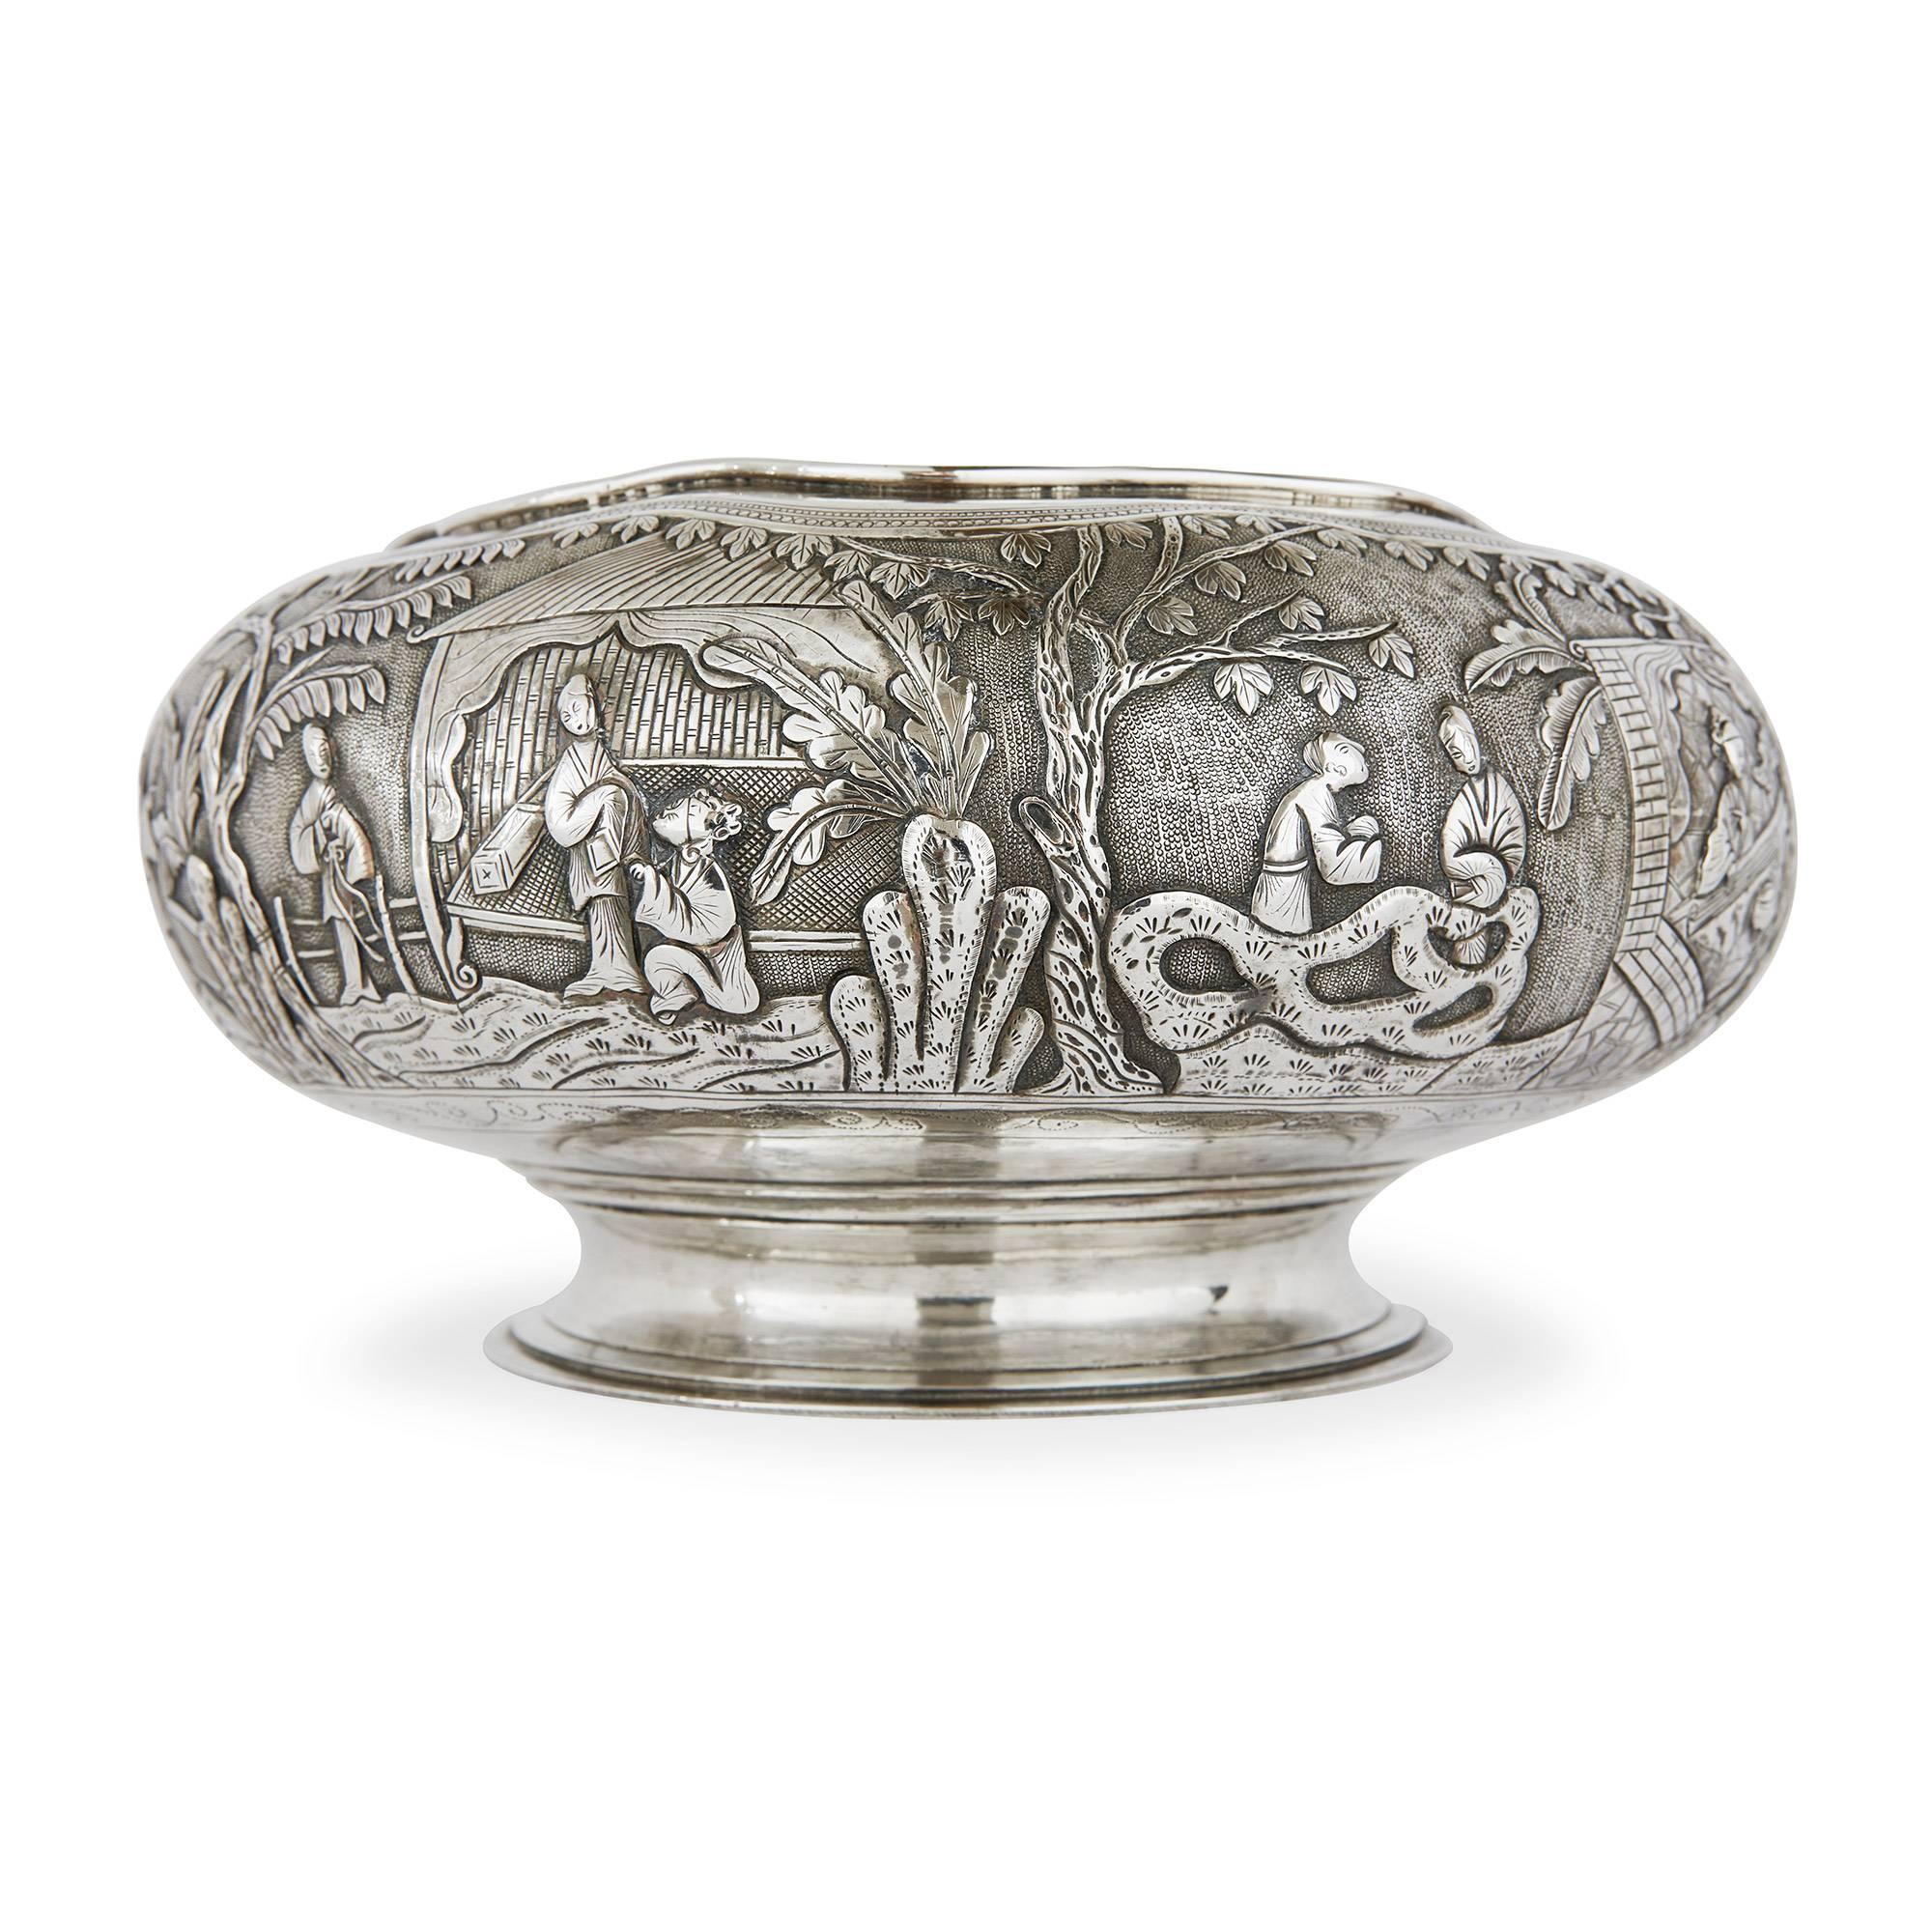 Embossed detailing of outdoor garden scenes with amorous couples, raised on a short waisted socle, the base inscribed 'Jiaozho, Chengde'.

This extensively detailed antique bowl is an example of the very finest quality of silver produced in China